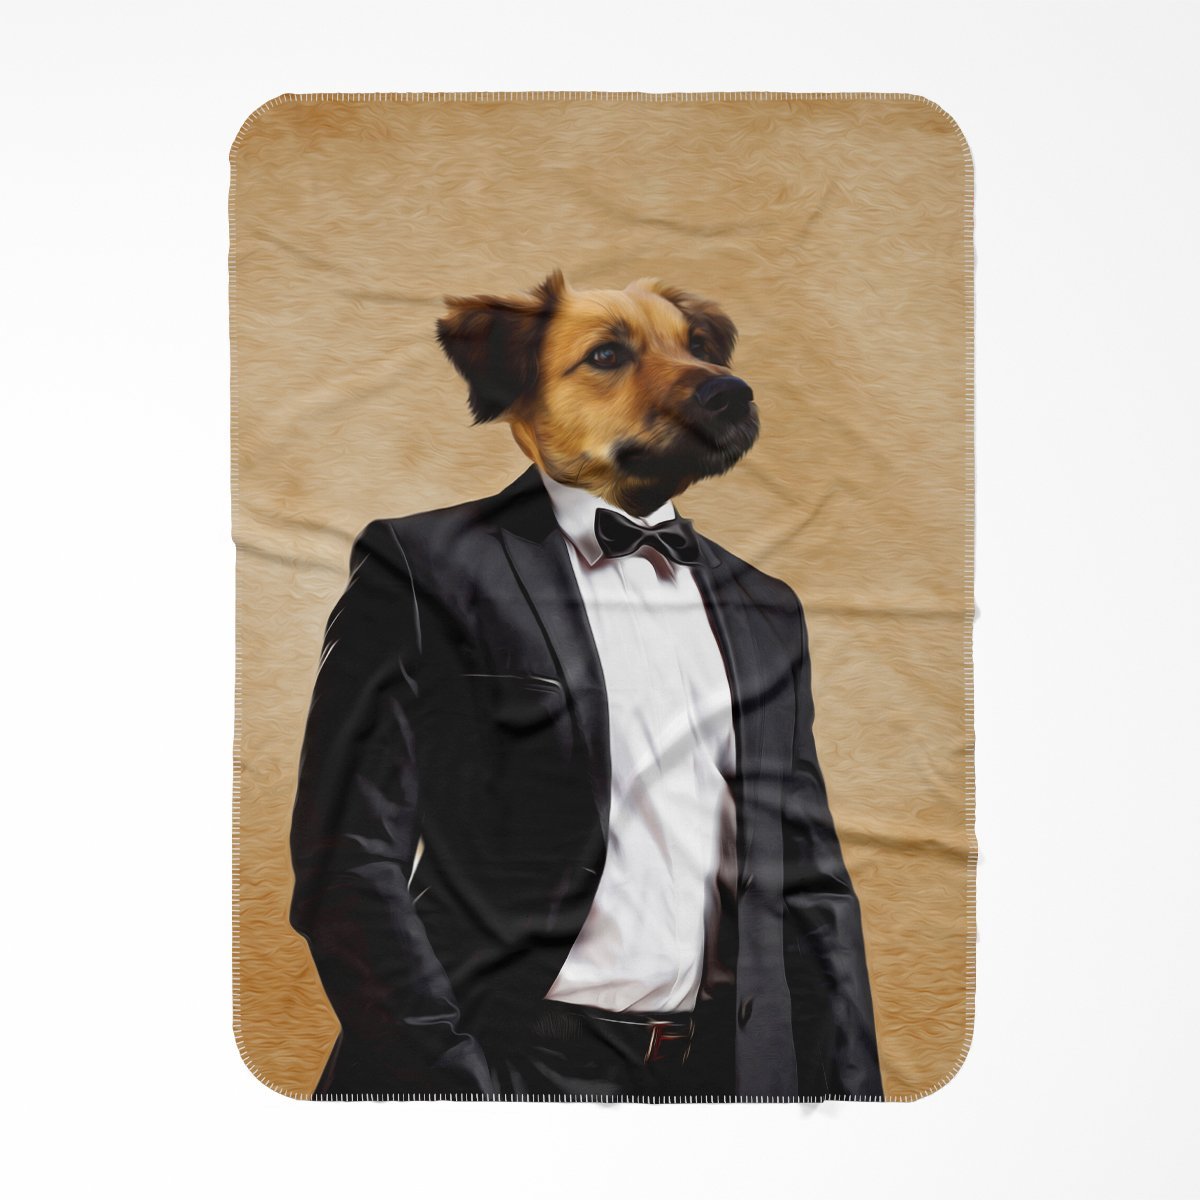 The Gentleman: Custom Pet Blanket - Paw & Glory - #pet portraits# - #dog portraits# - #pet portraits uk#Pawandglory, Pet art blanket,pet sherpa blanket, blanket with a picture of my dog, soft blankets for dogs, pet image blanket, fleece animal blanket